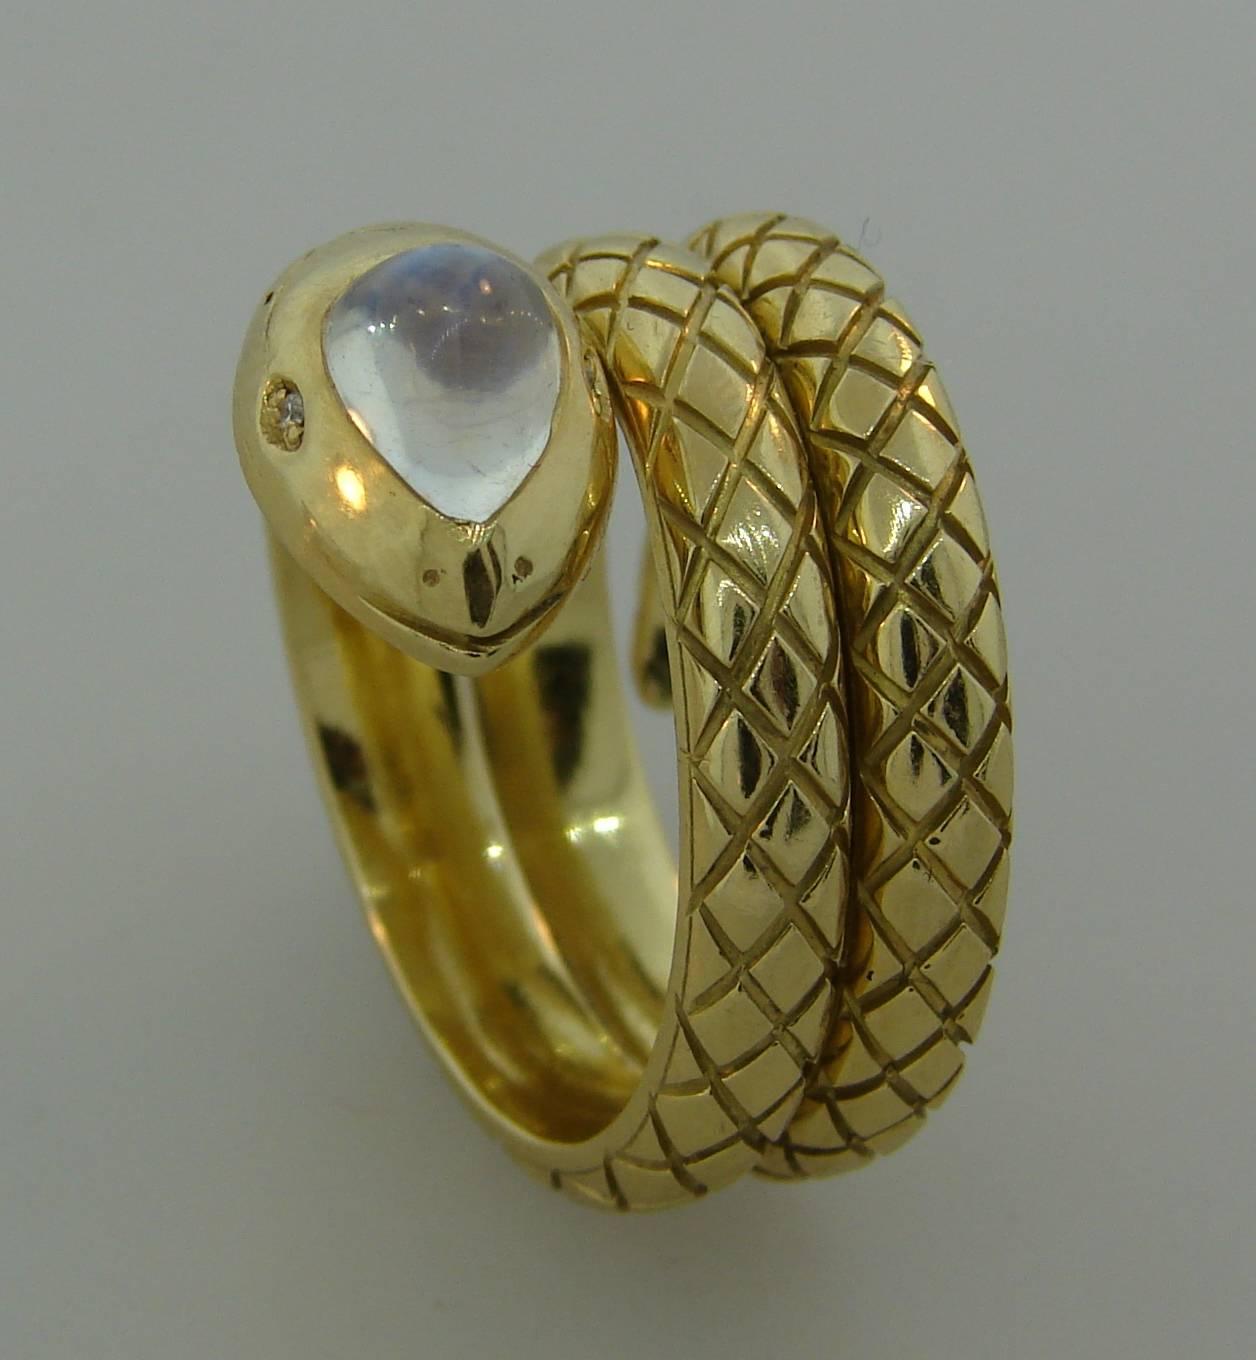 People were always fascinated by snakes and since ancient times that fascination has made snake motif widely used in jewelry. This elegant and stylish ring is a perfect example of it! Created by Temple St. Clair in the 1980's, the ring is made of 18